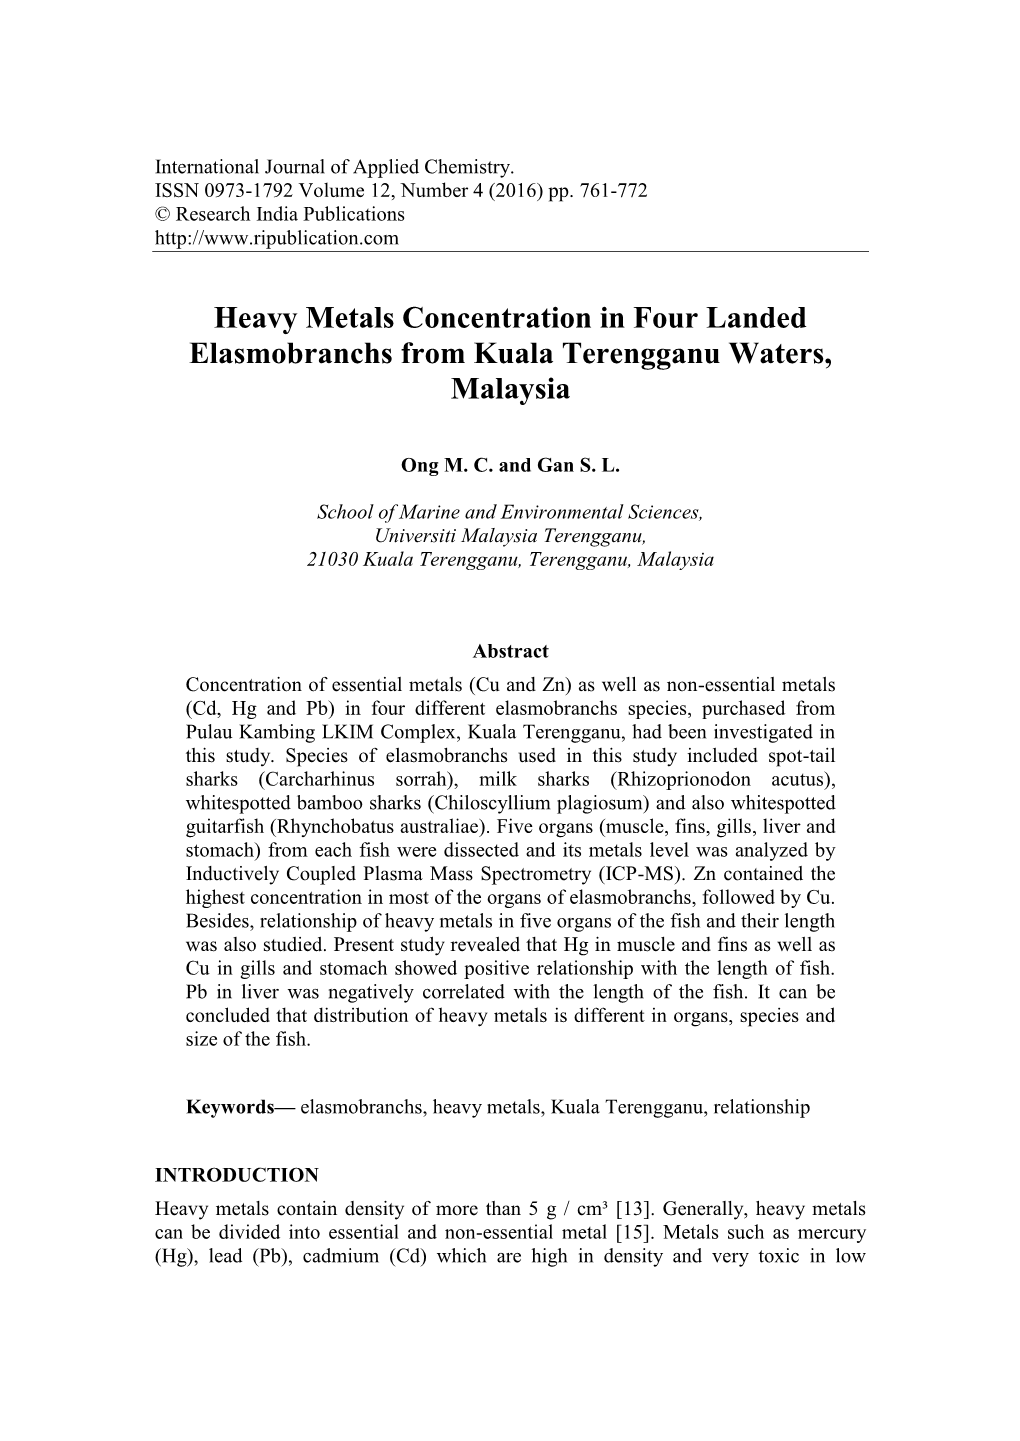 Heavy Metals Concentration in Four Landed Elasmobranchs from Kuala Terengganu Waters, Malaysia